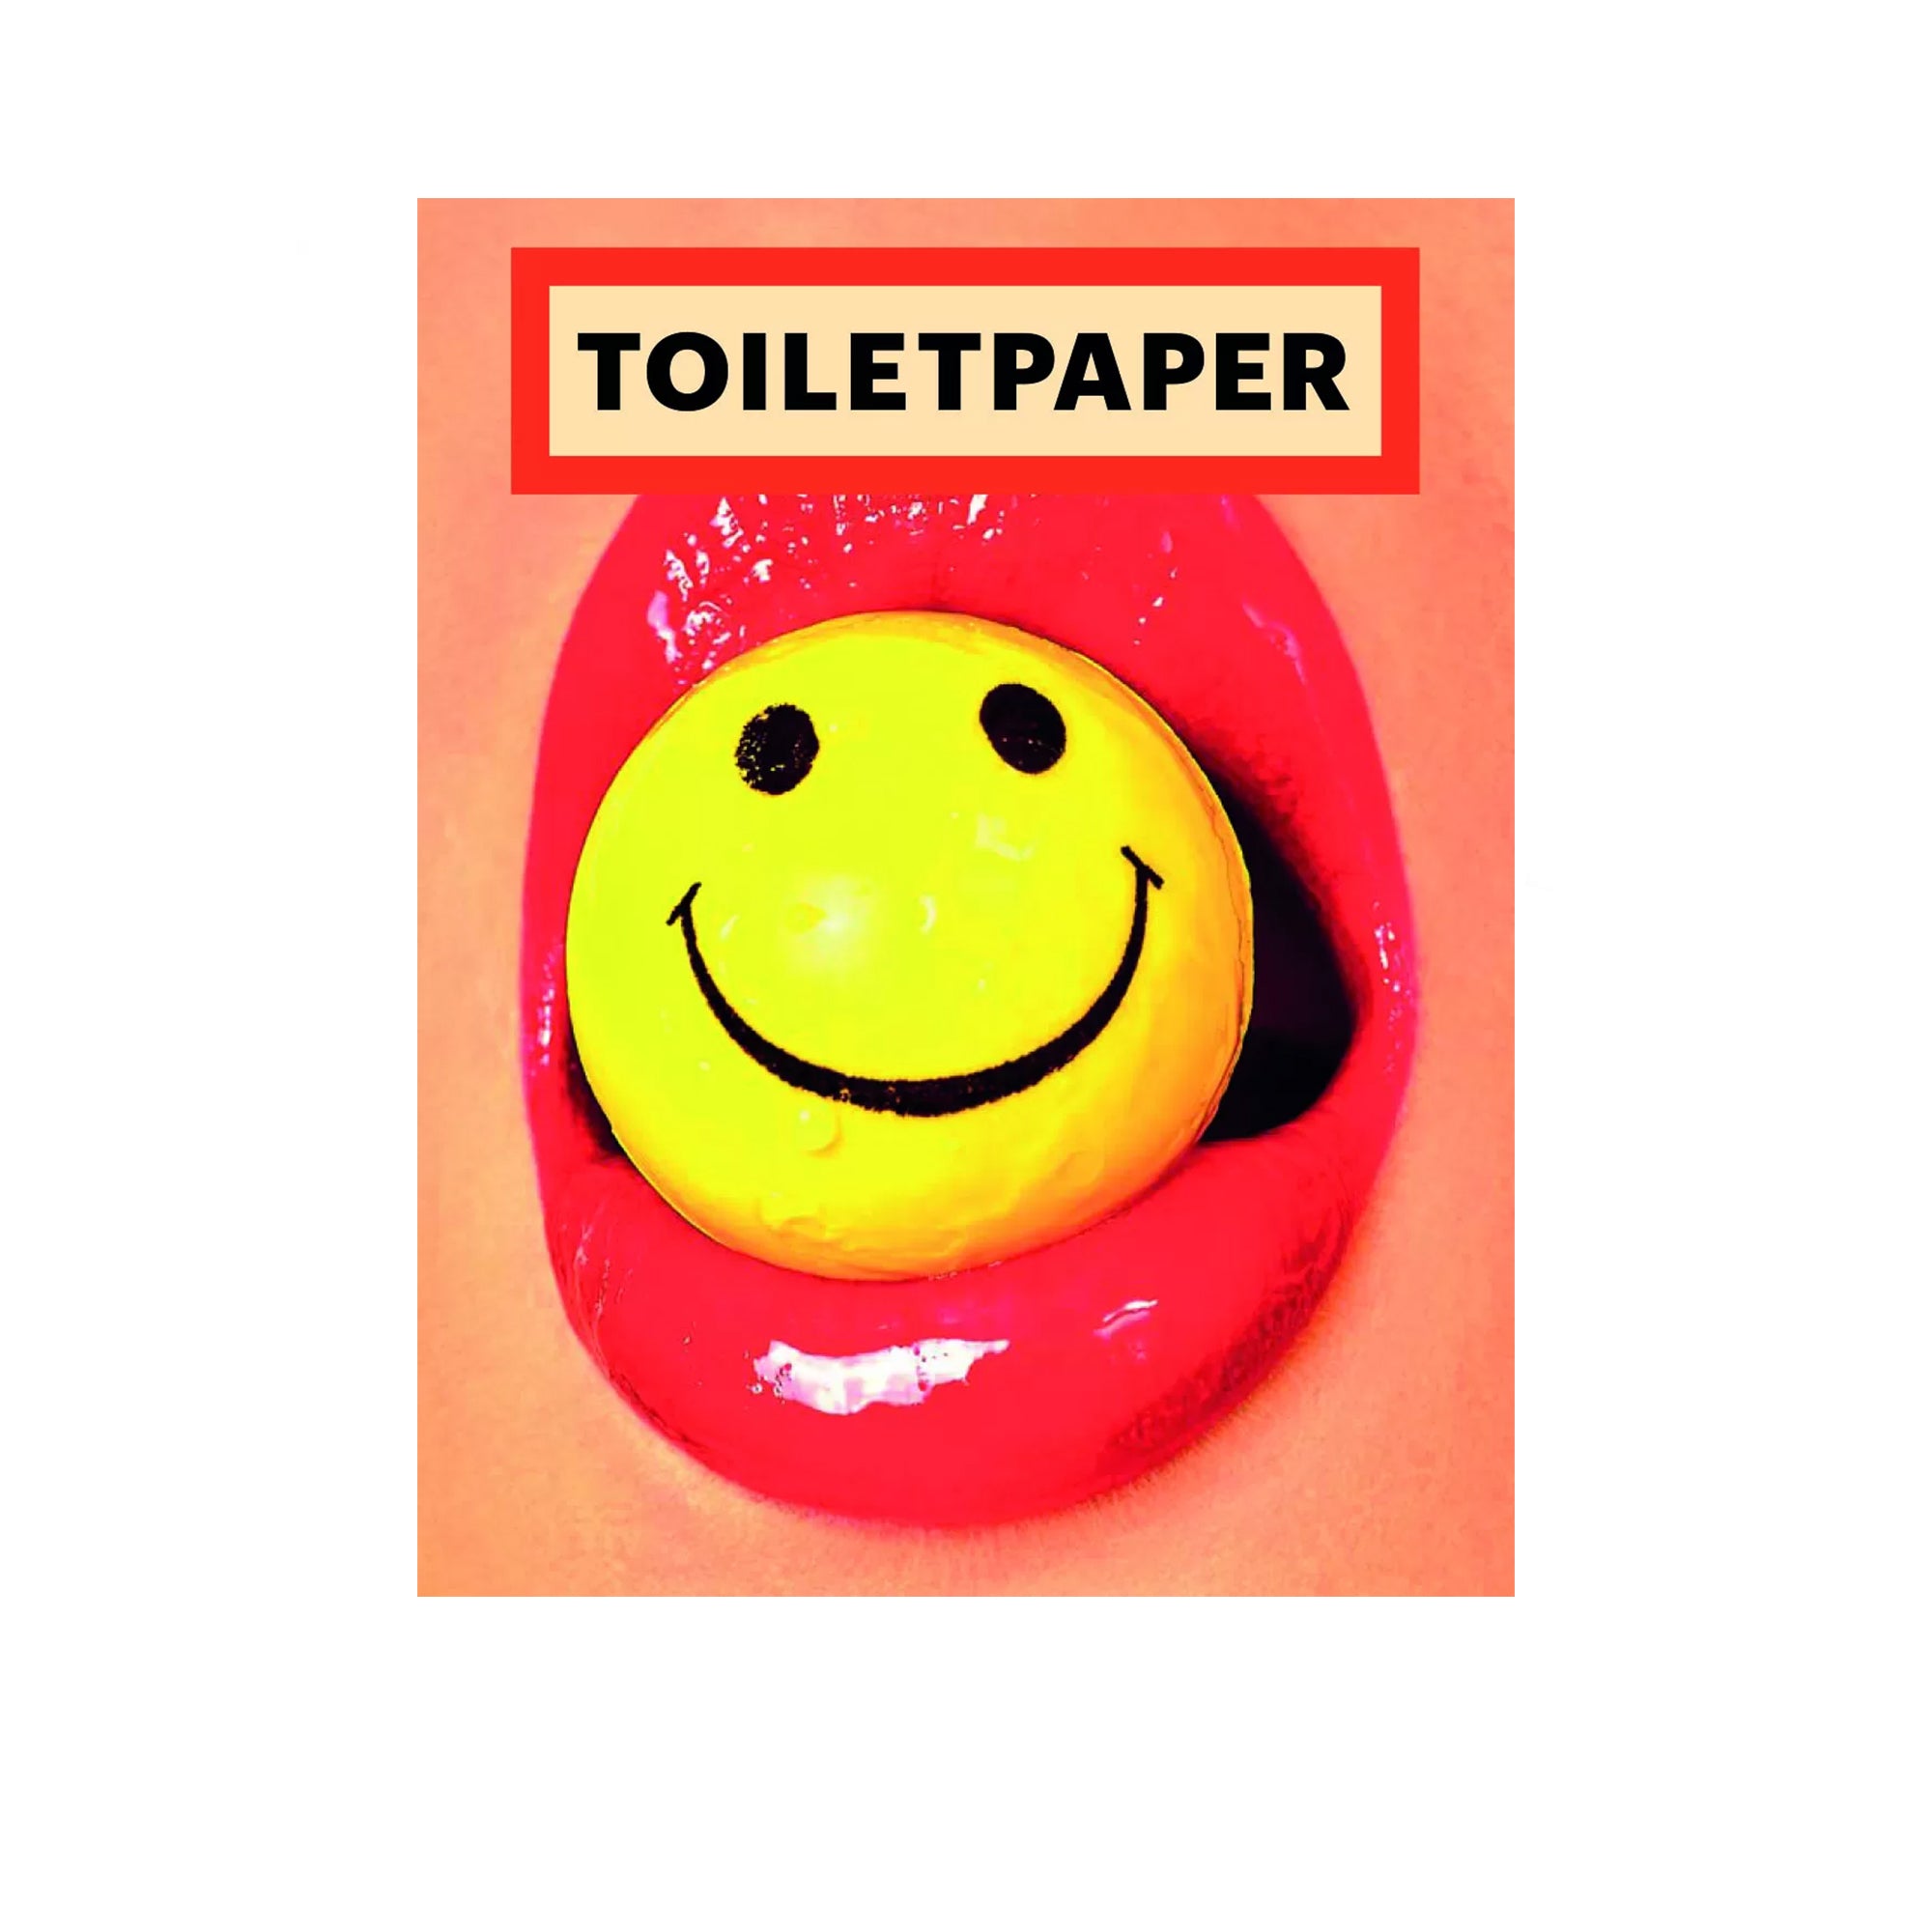 Toilet Paper, Issue 18